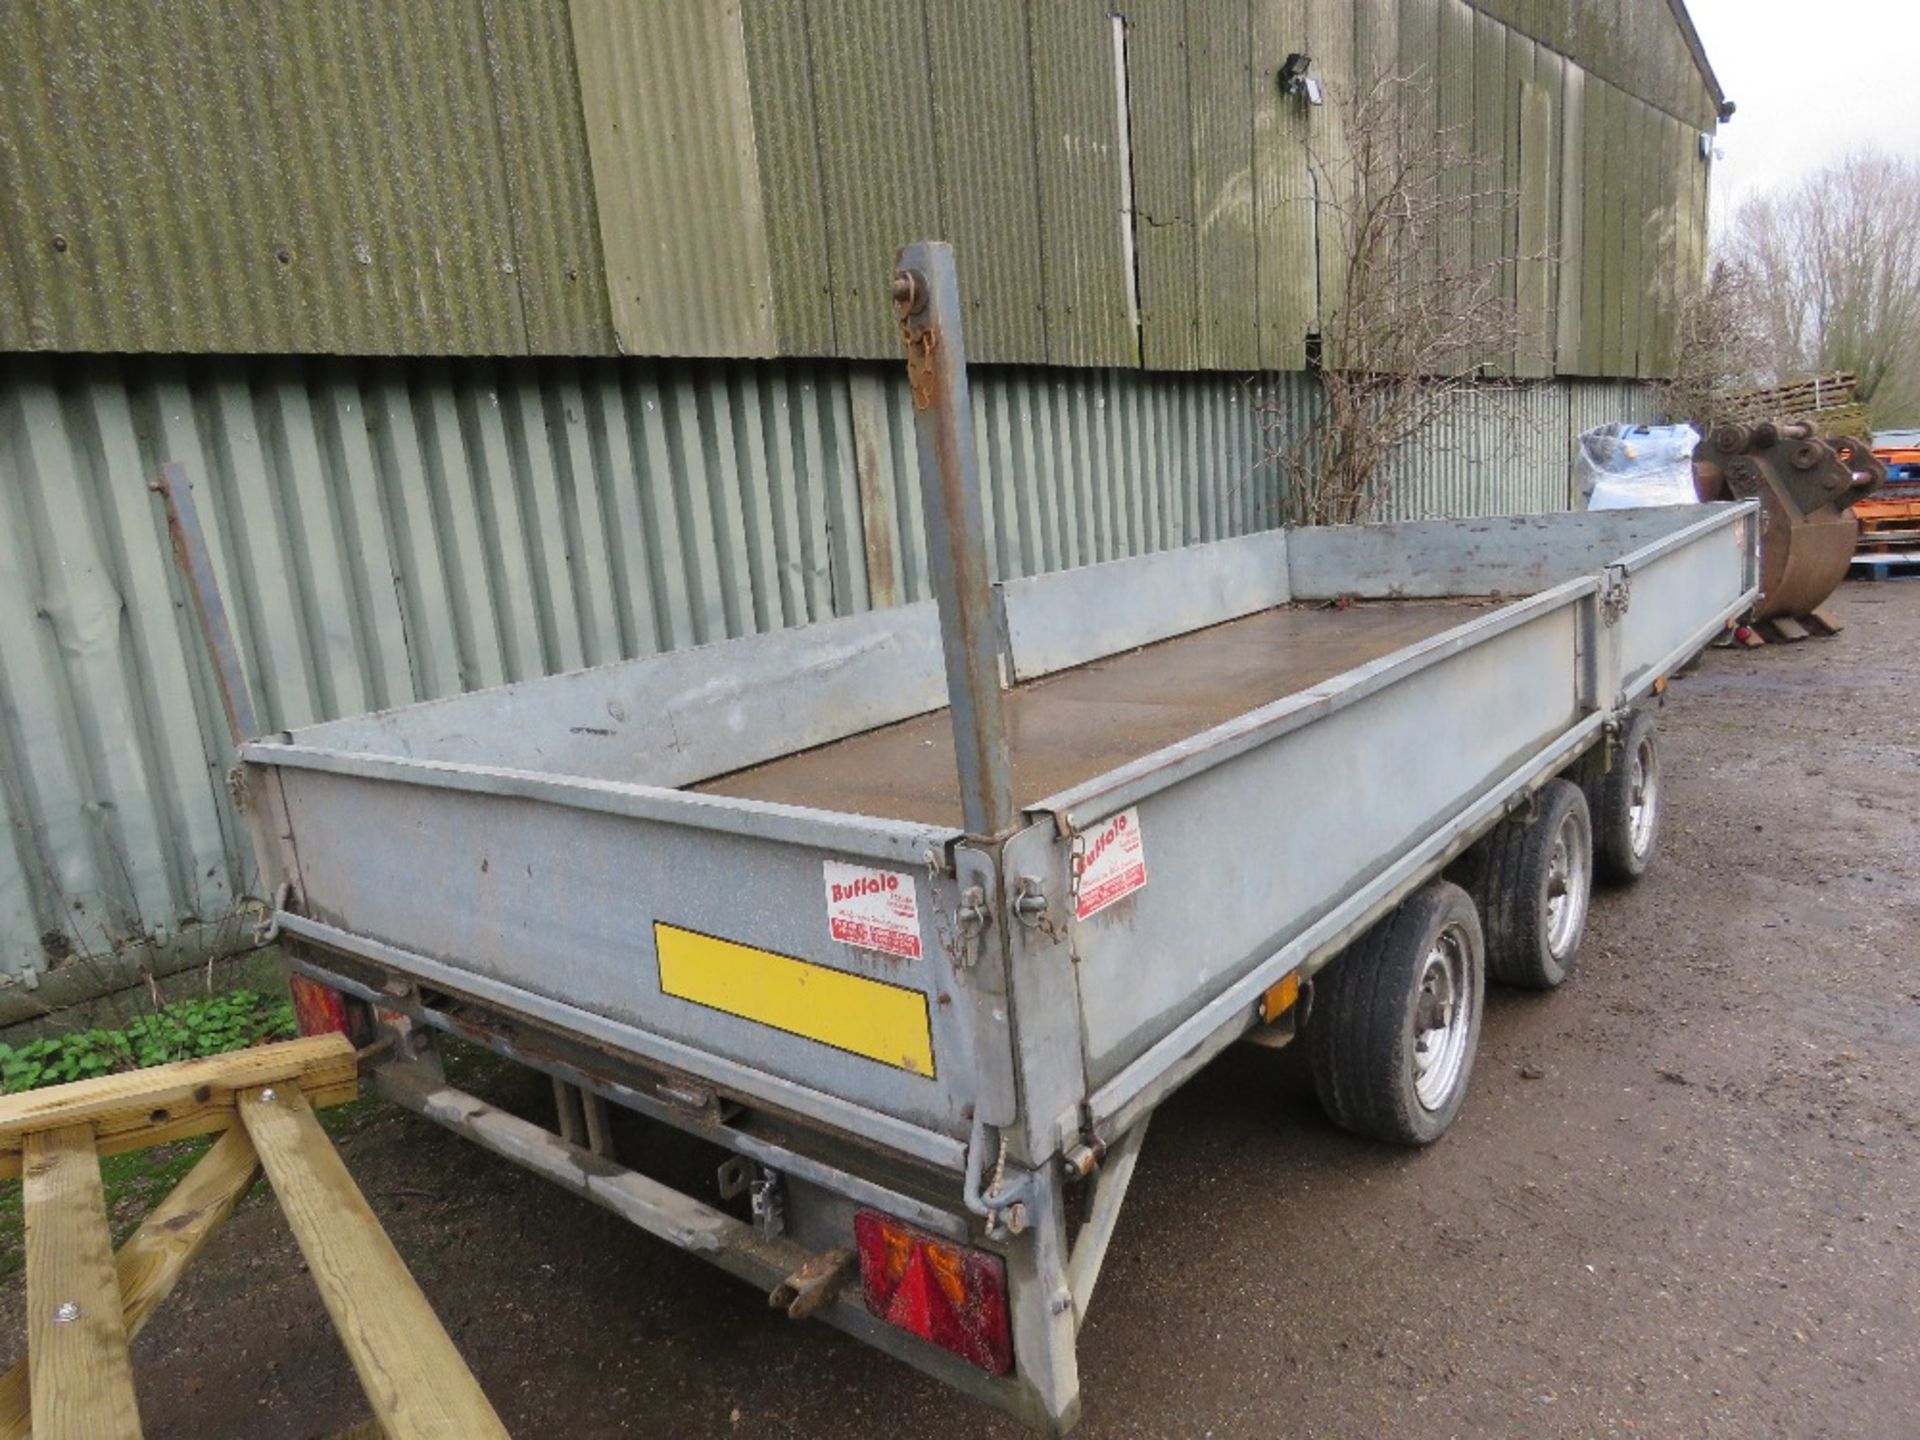 BUFFALO TRIAXLE HEAVY DUTY PLANT TRAILERT 16FT (4.88M ) approx X 1.94M WIDTH APPROX. 35..KG RATED. - Image 2 of 8